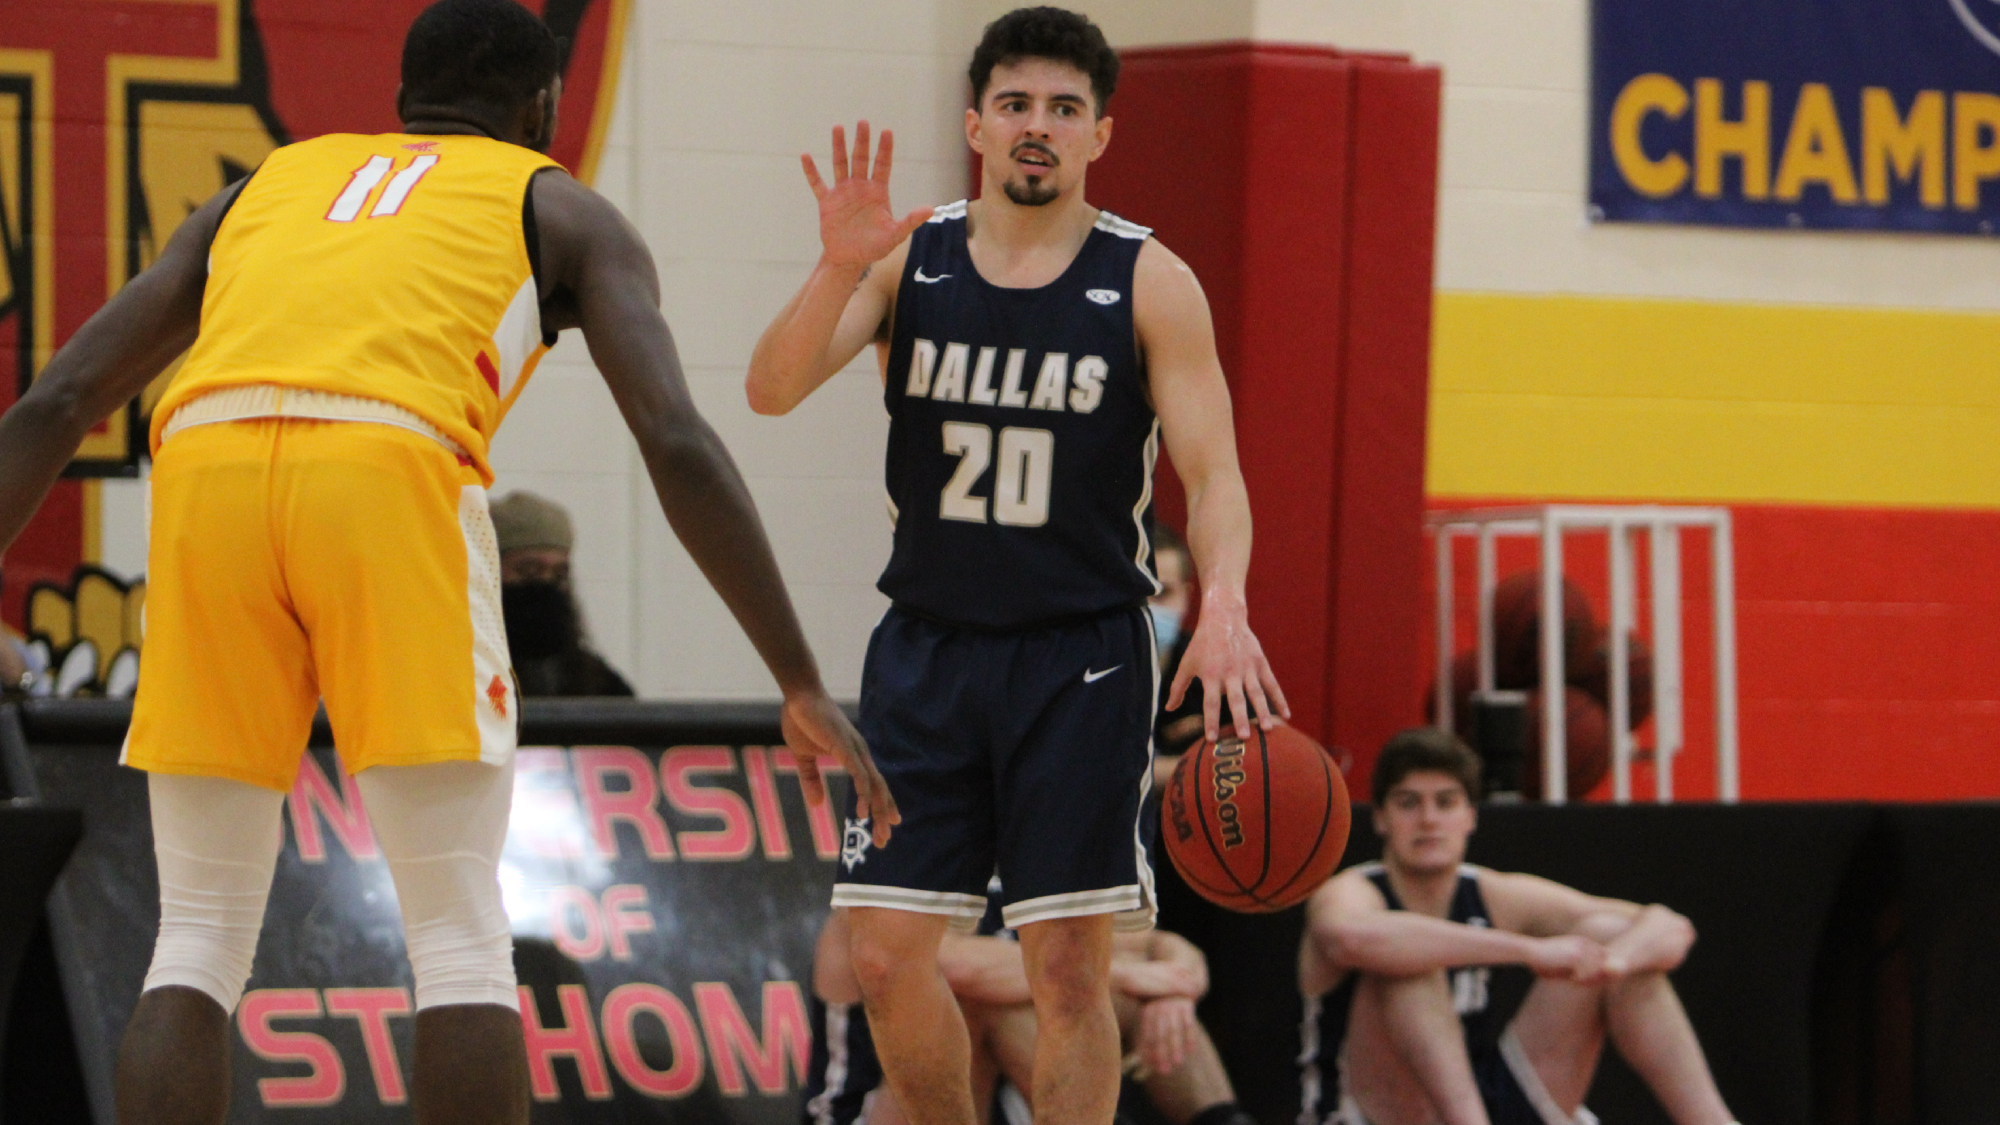 #7 Dallas edged by #2 St. Thomas in SCAC Quarterfinals